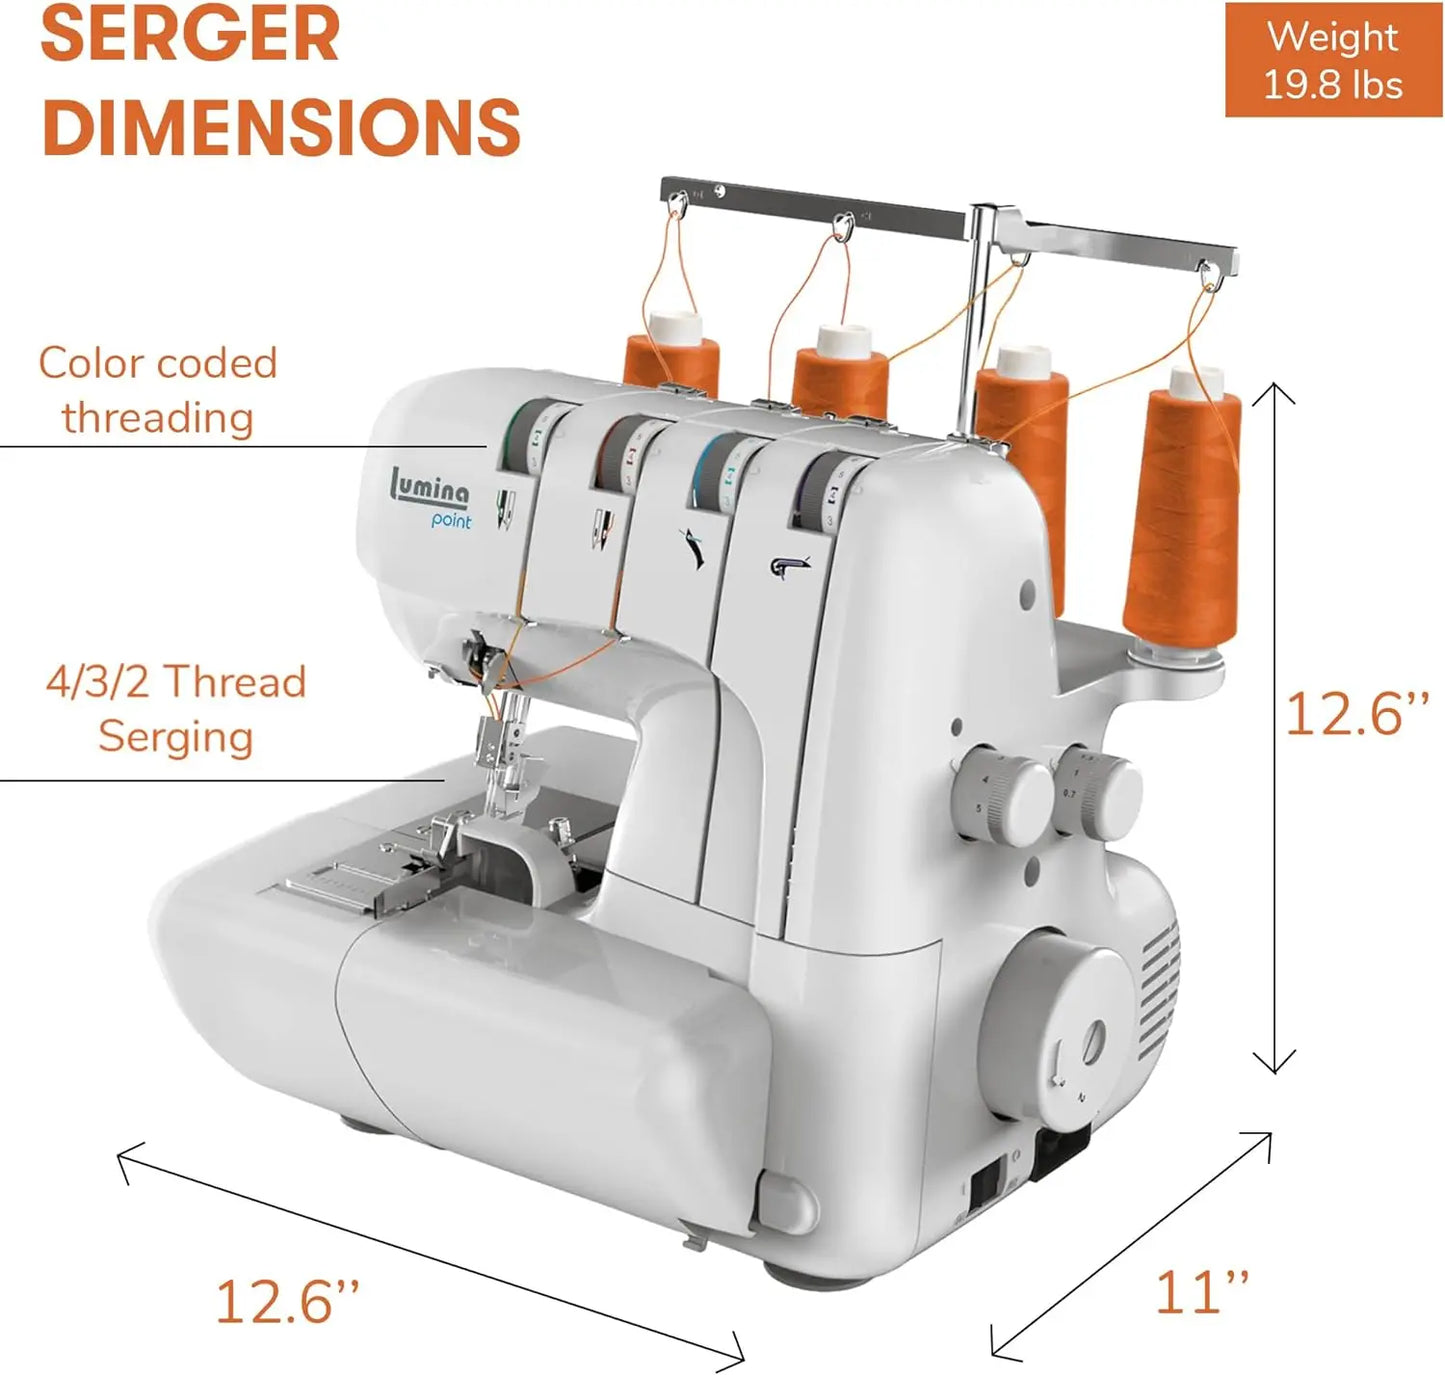 Strong 2/3/4 Serger Thread Capability, Sewing Machine